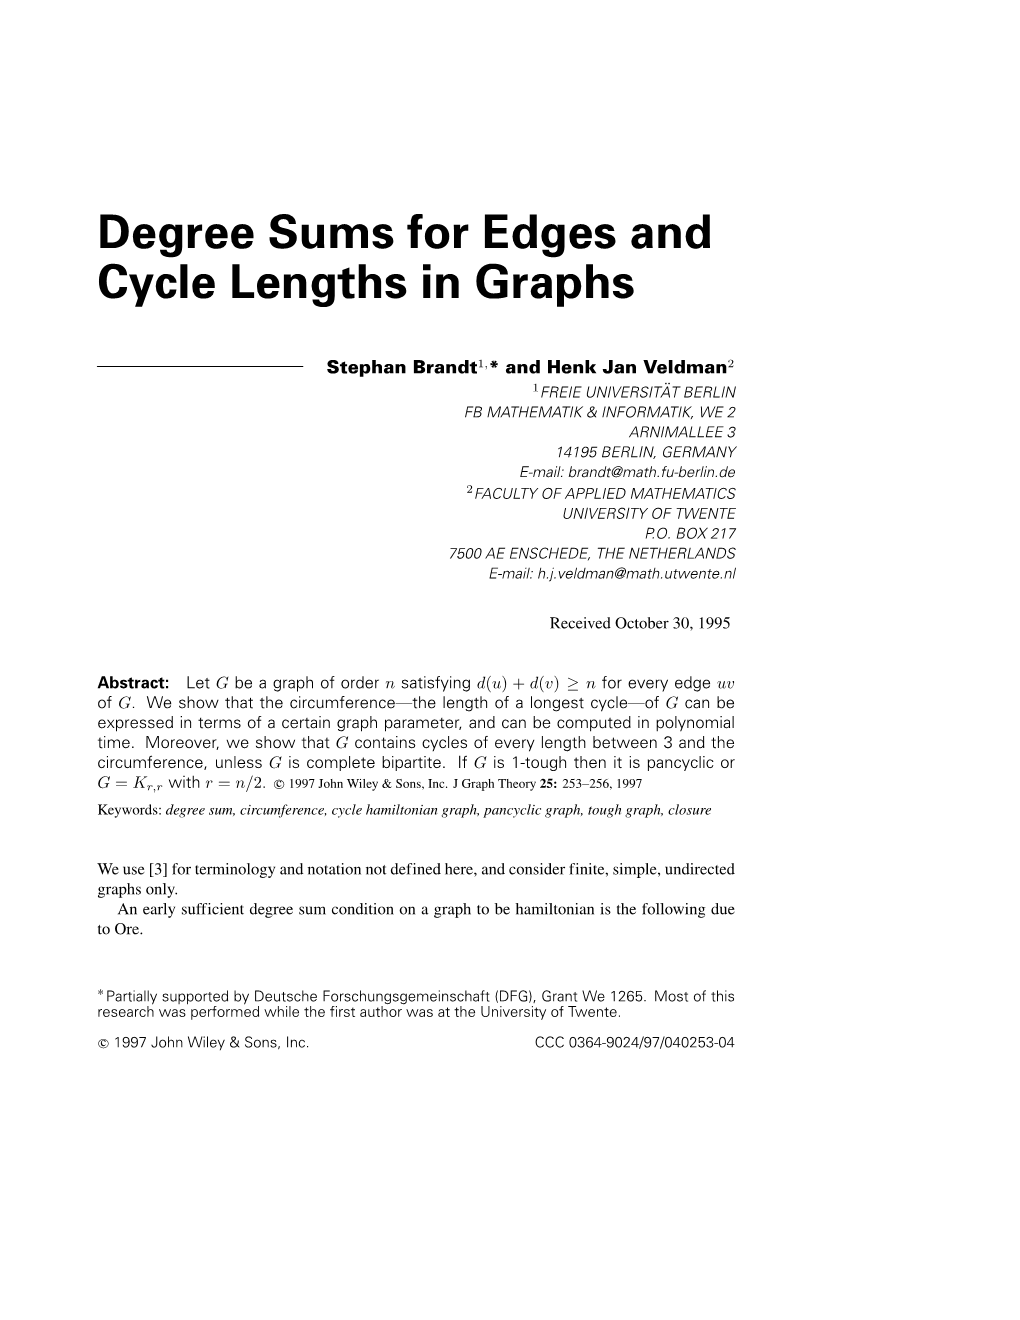 Degree Sums for Edges and Cycle Lengths in Graphs